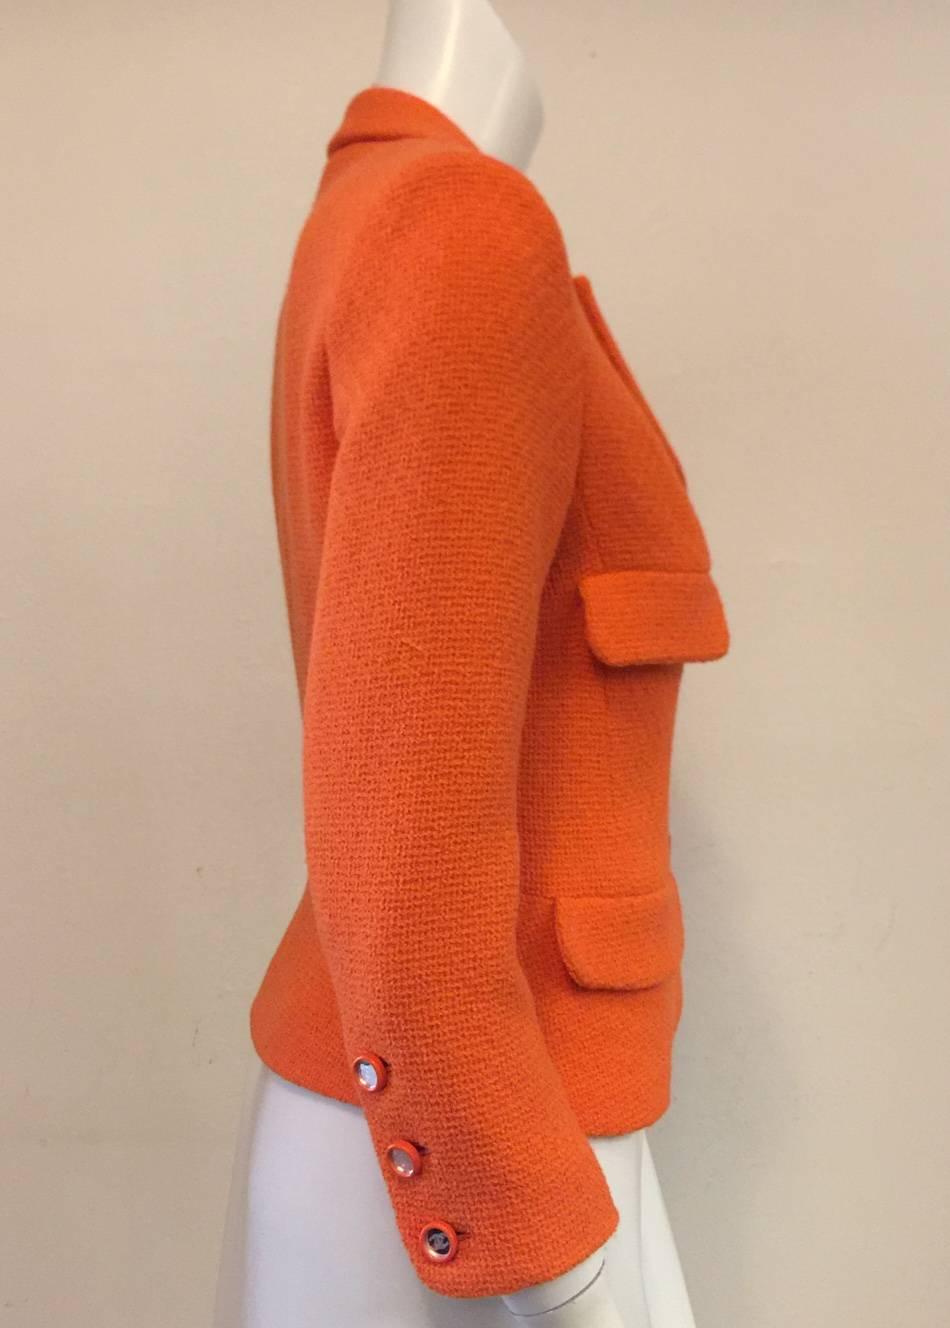 Chanel Boutique Mandarin Orange Wool Blend Jacket is a must for any 